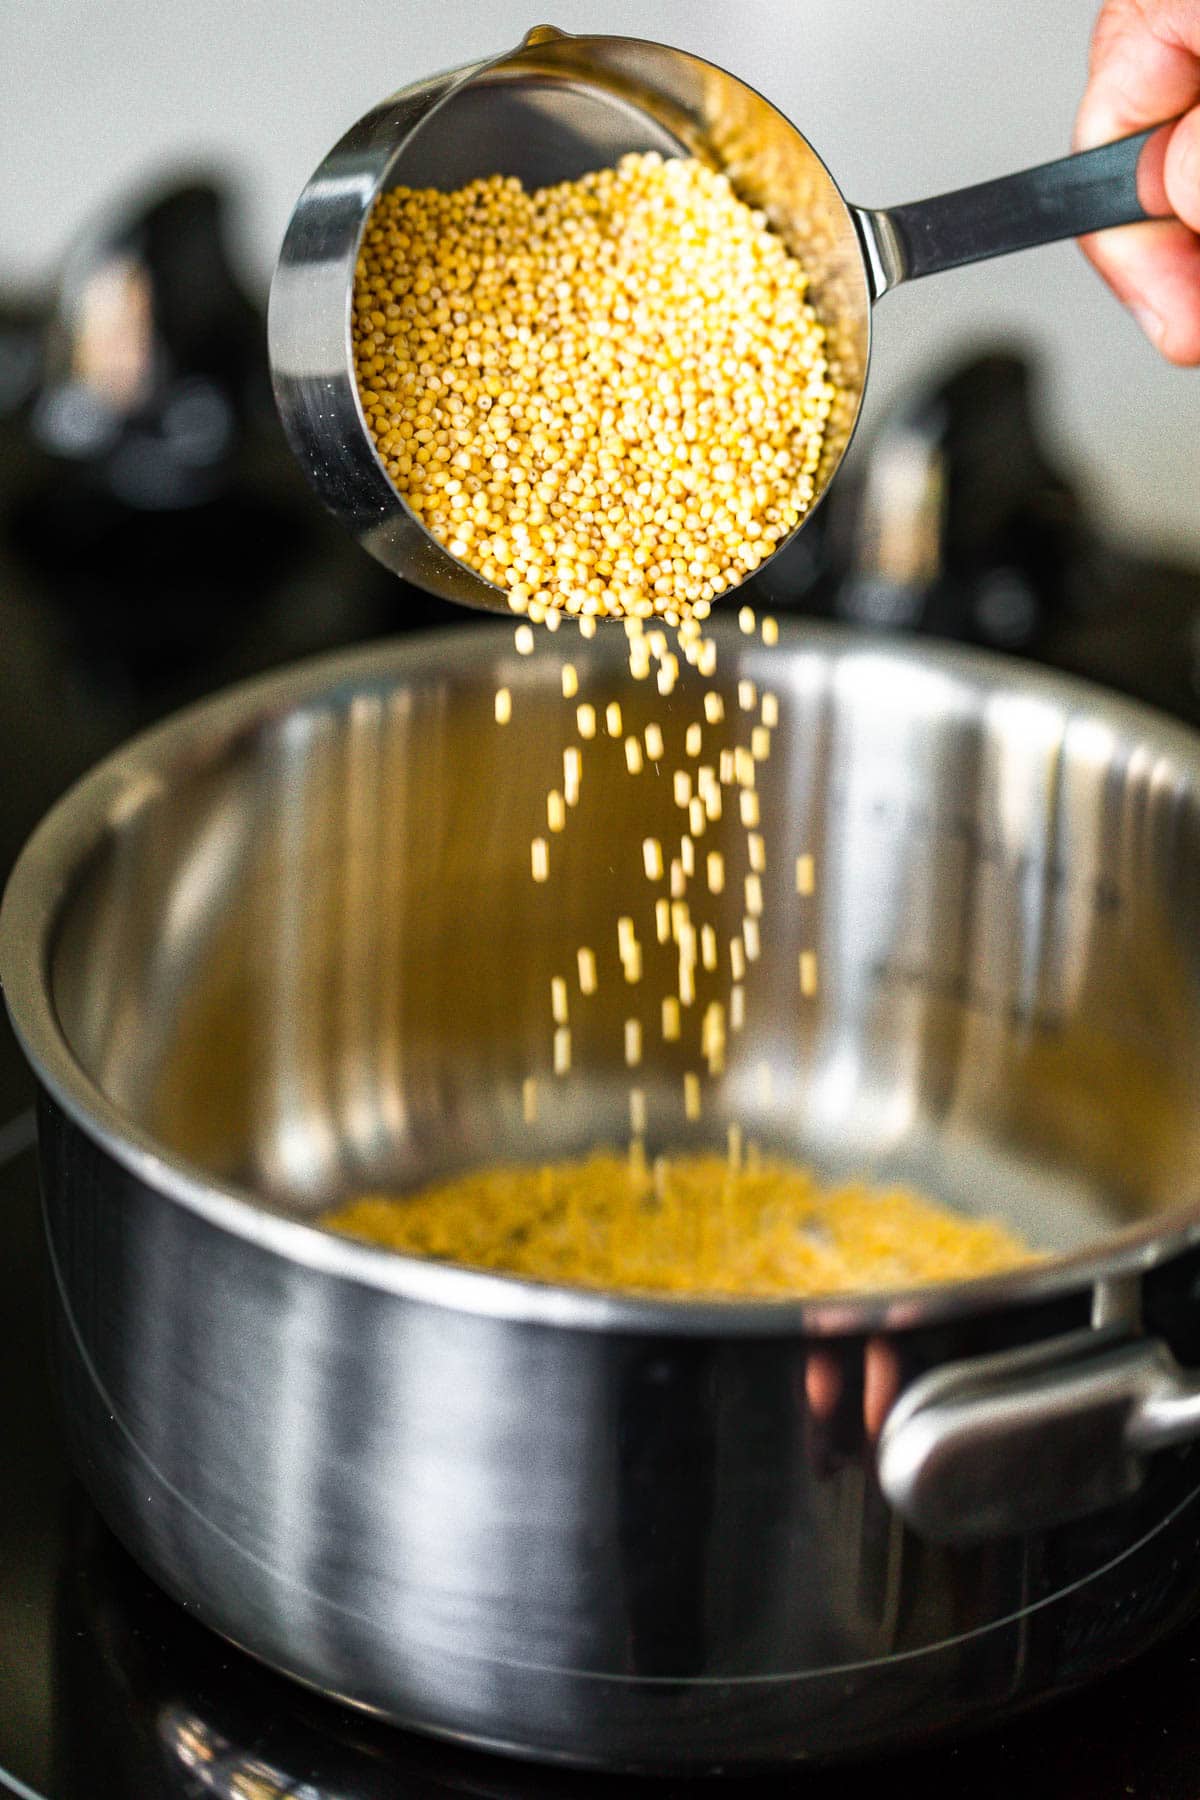 A measuring cup filled with millet being poured into saucepan